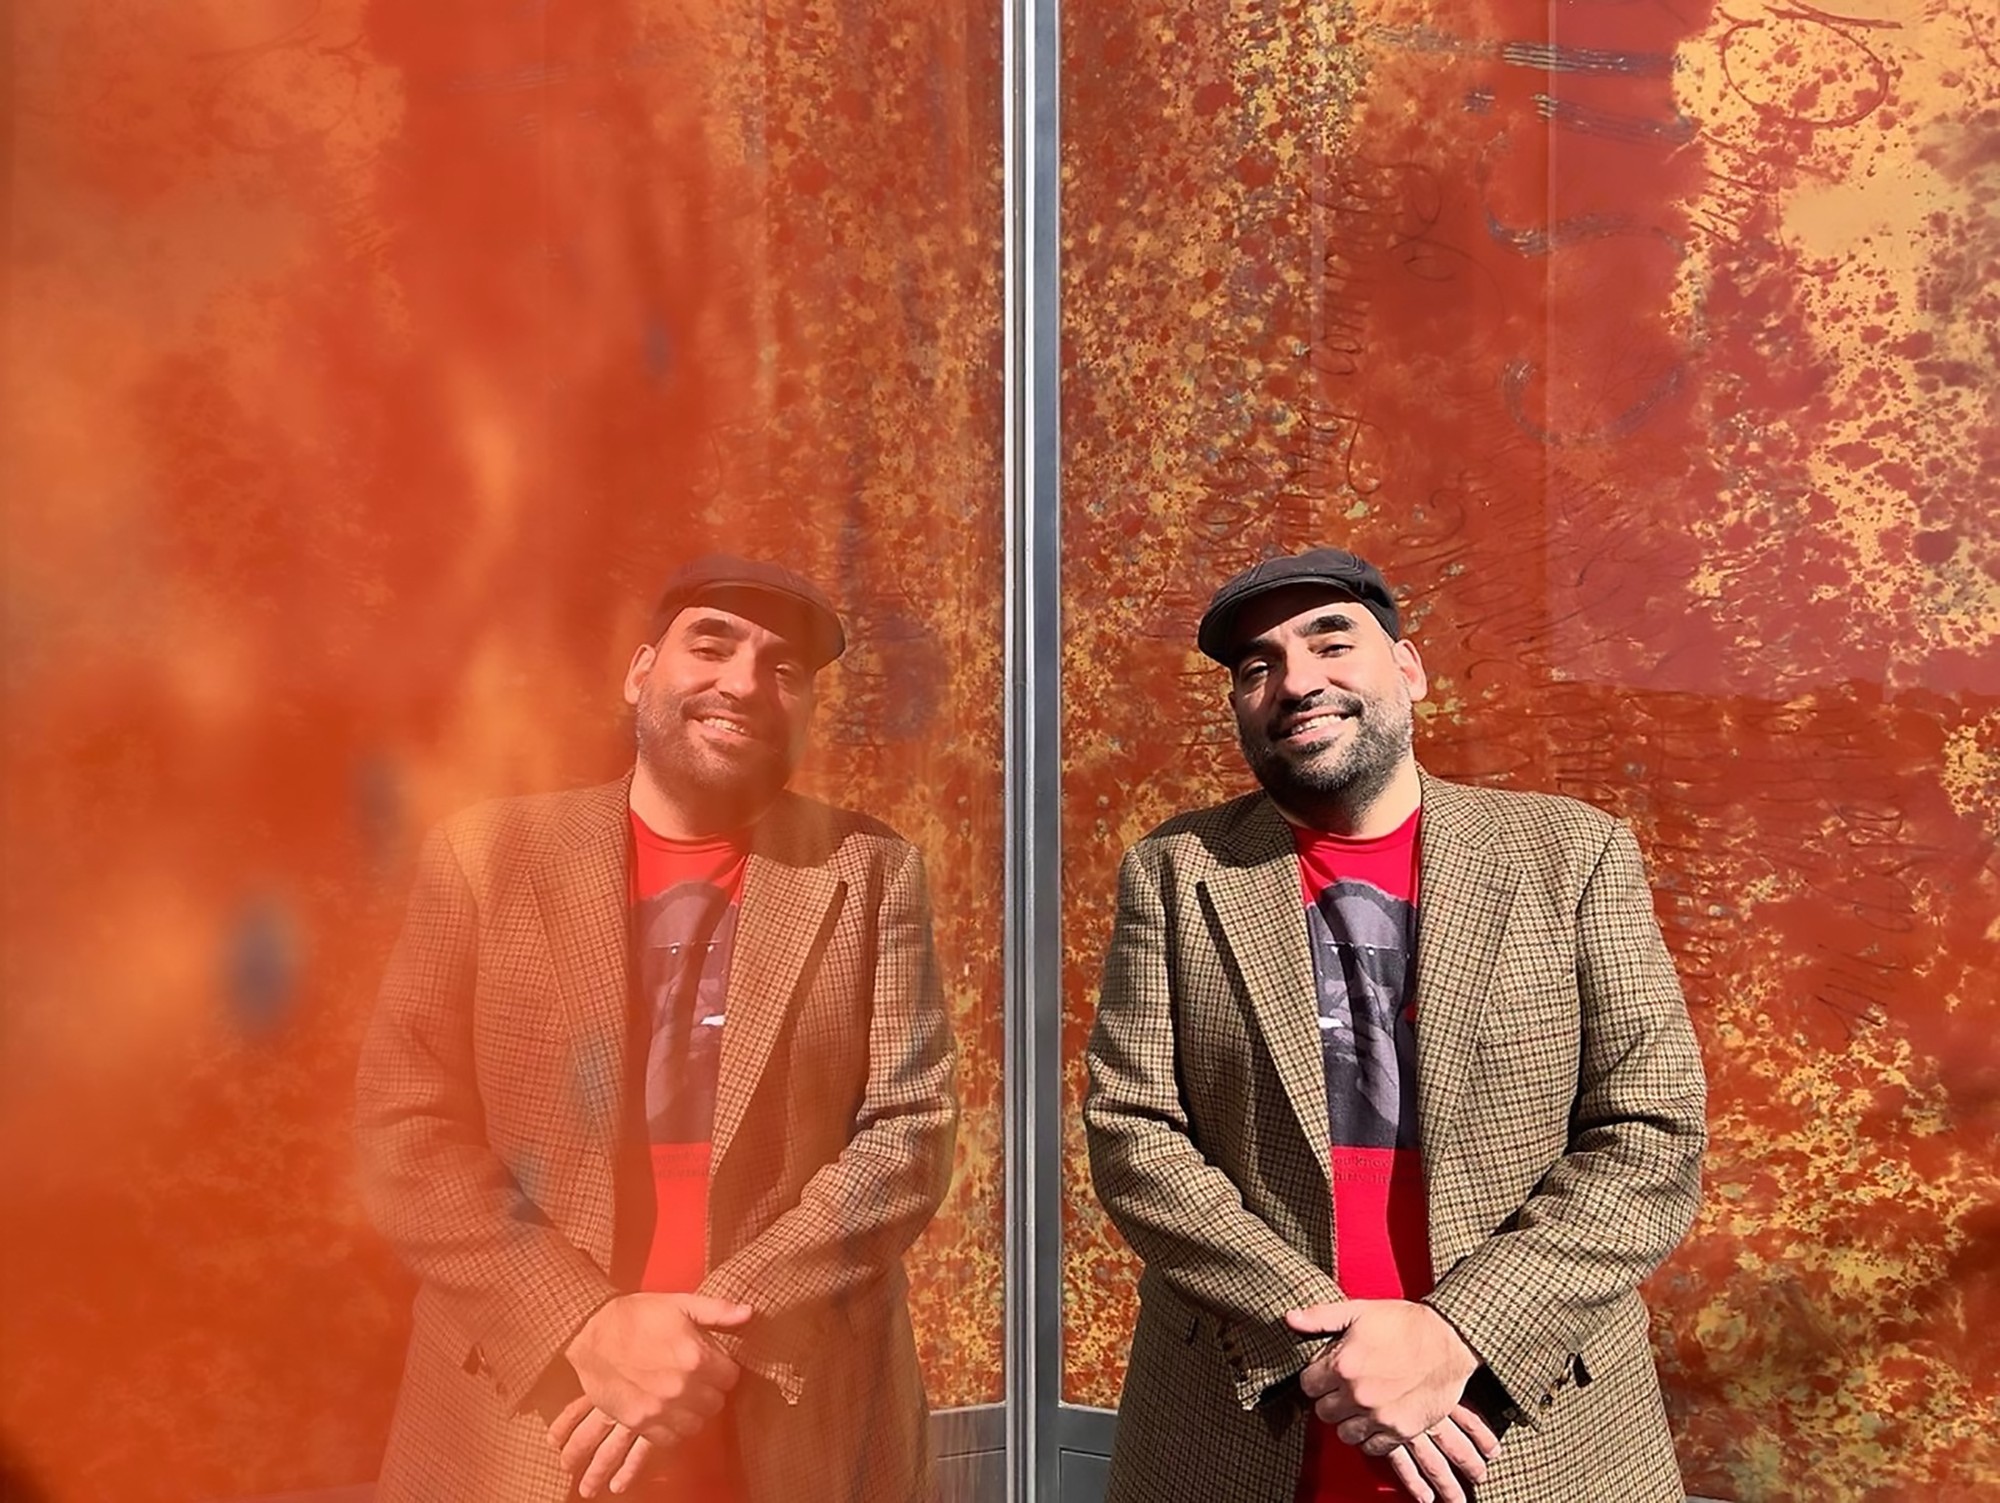 Urayoán stands in front of a red wall, wearing a hat, and a blazer over a red t-shirt. He is looking at the camera and smiling.